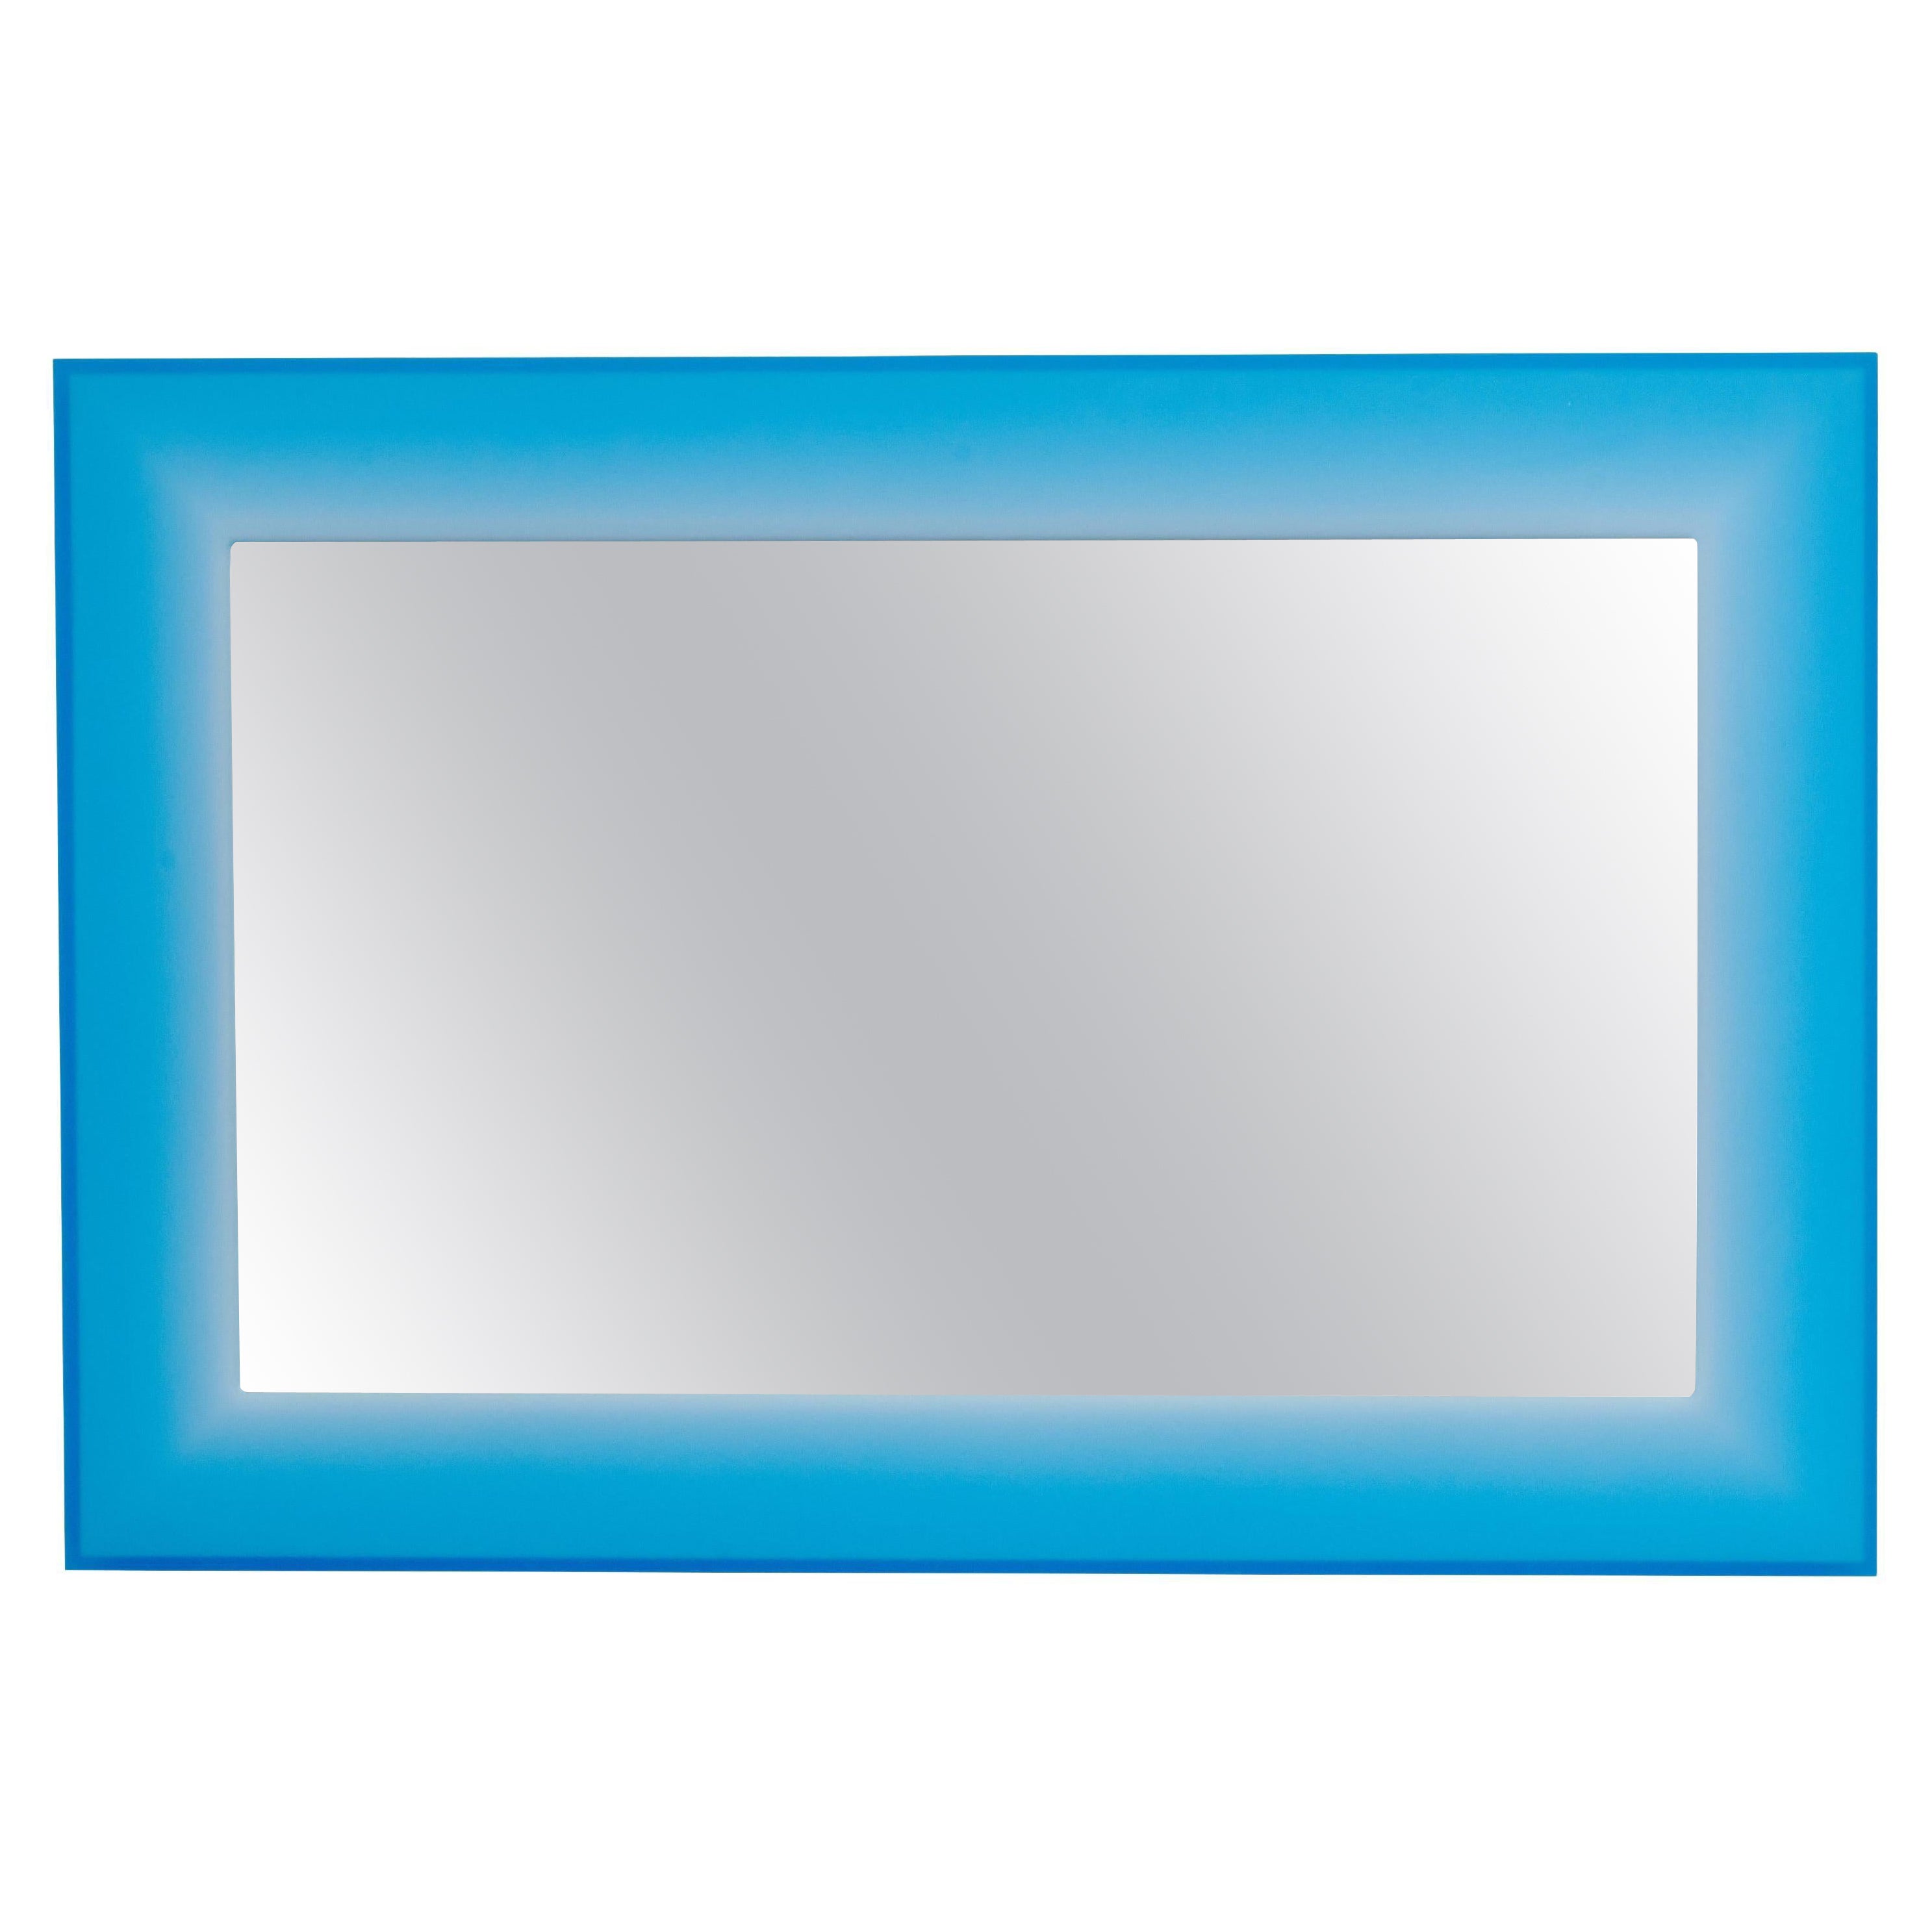 Rectangular Resin Mirror in Blue by Facture, Represented by Tuleste Factory